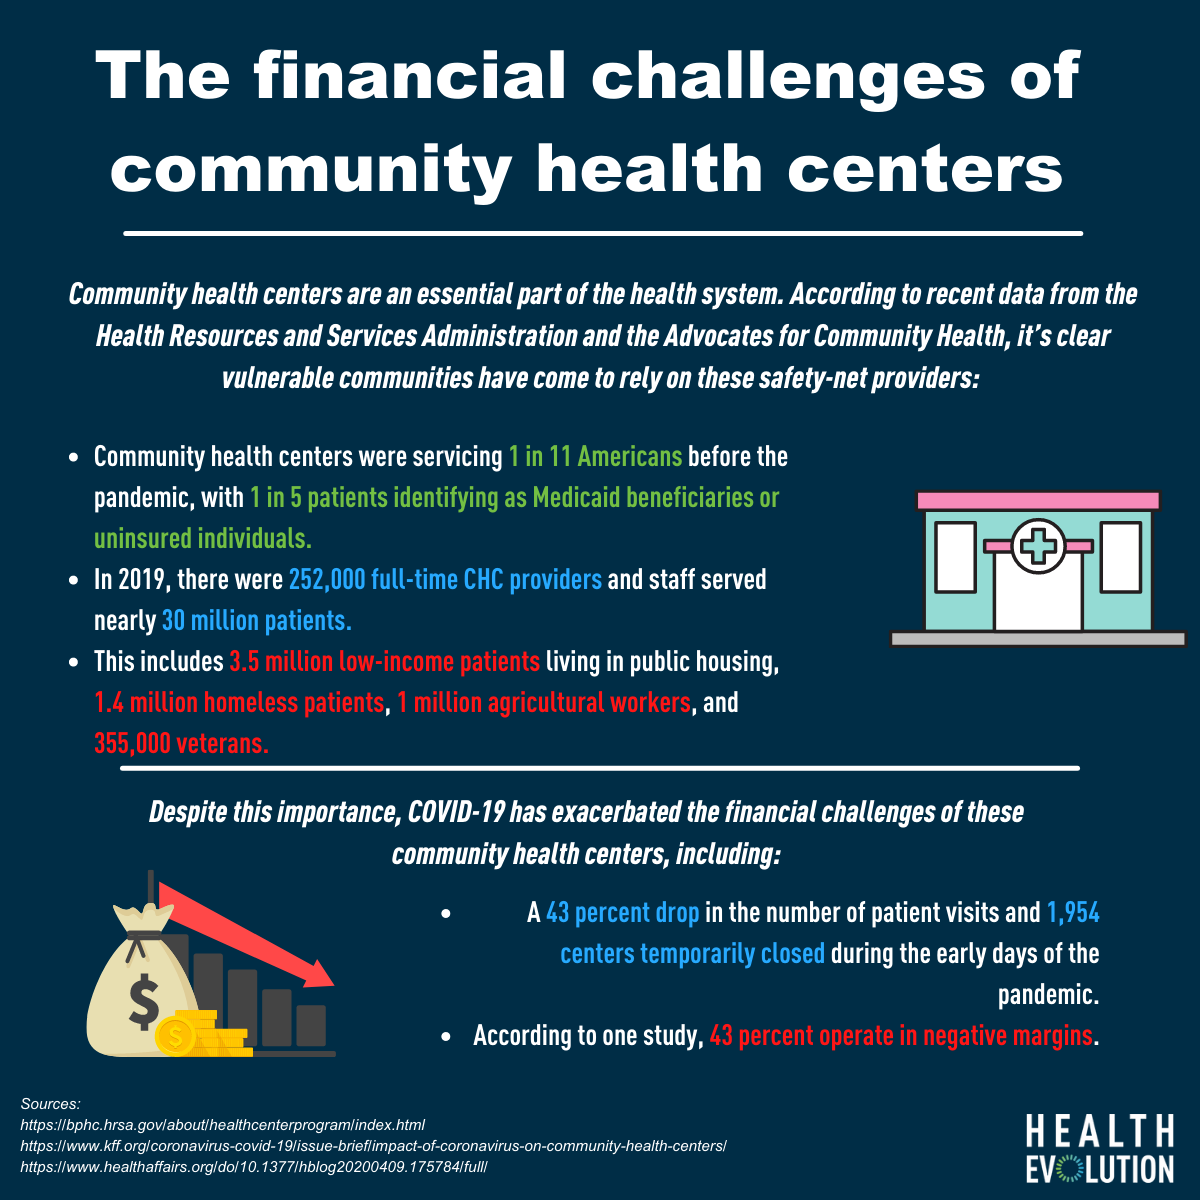 Community health centers need more than just federal funding